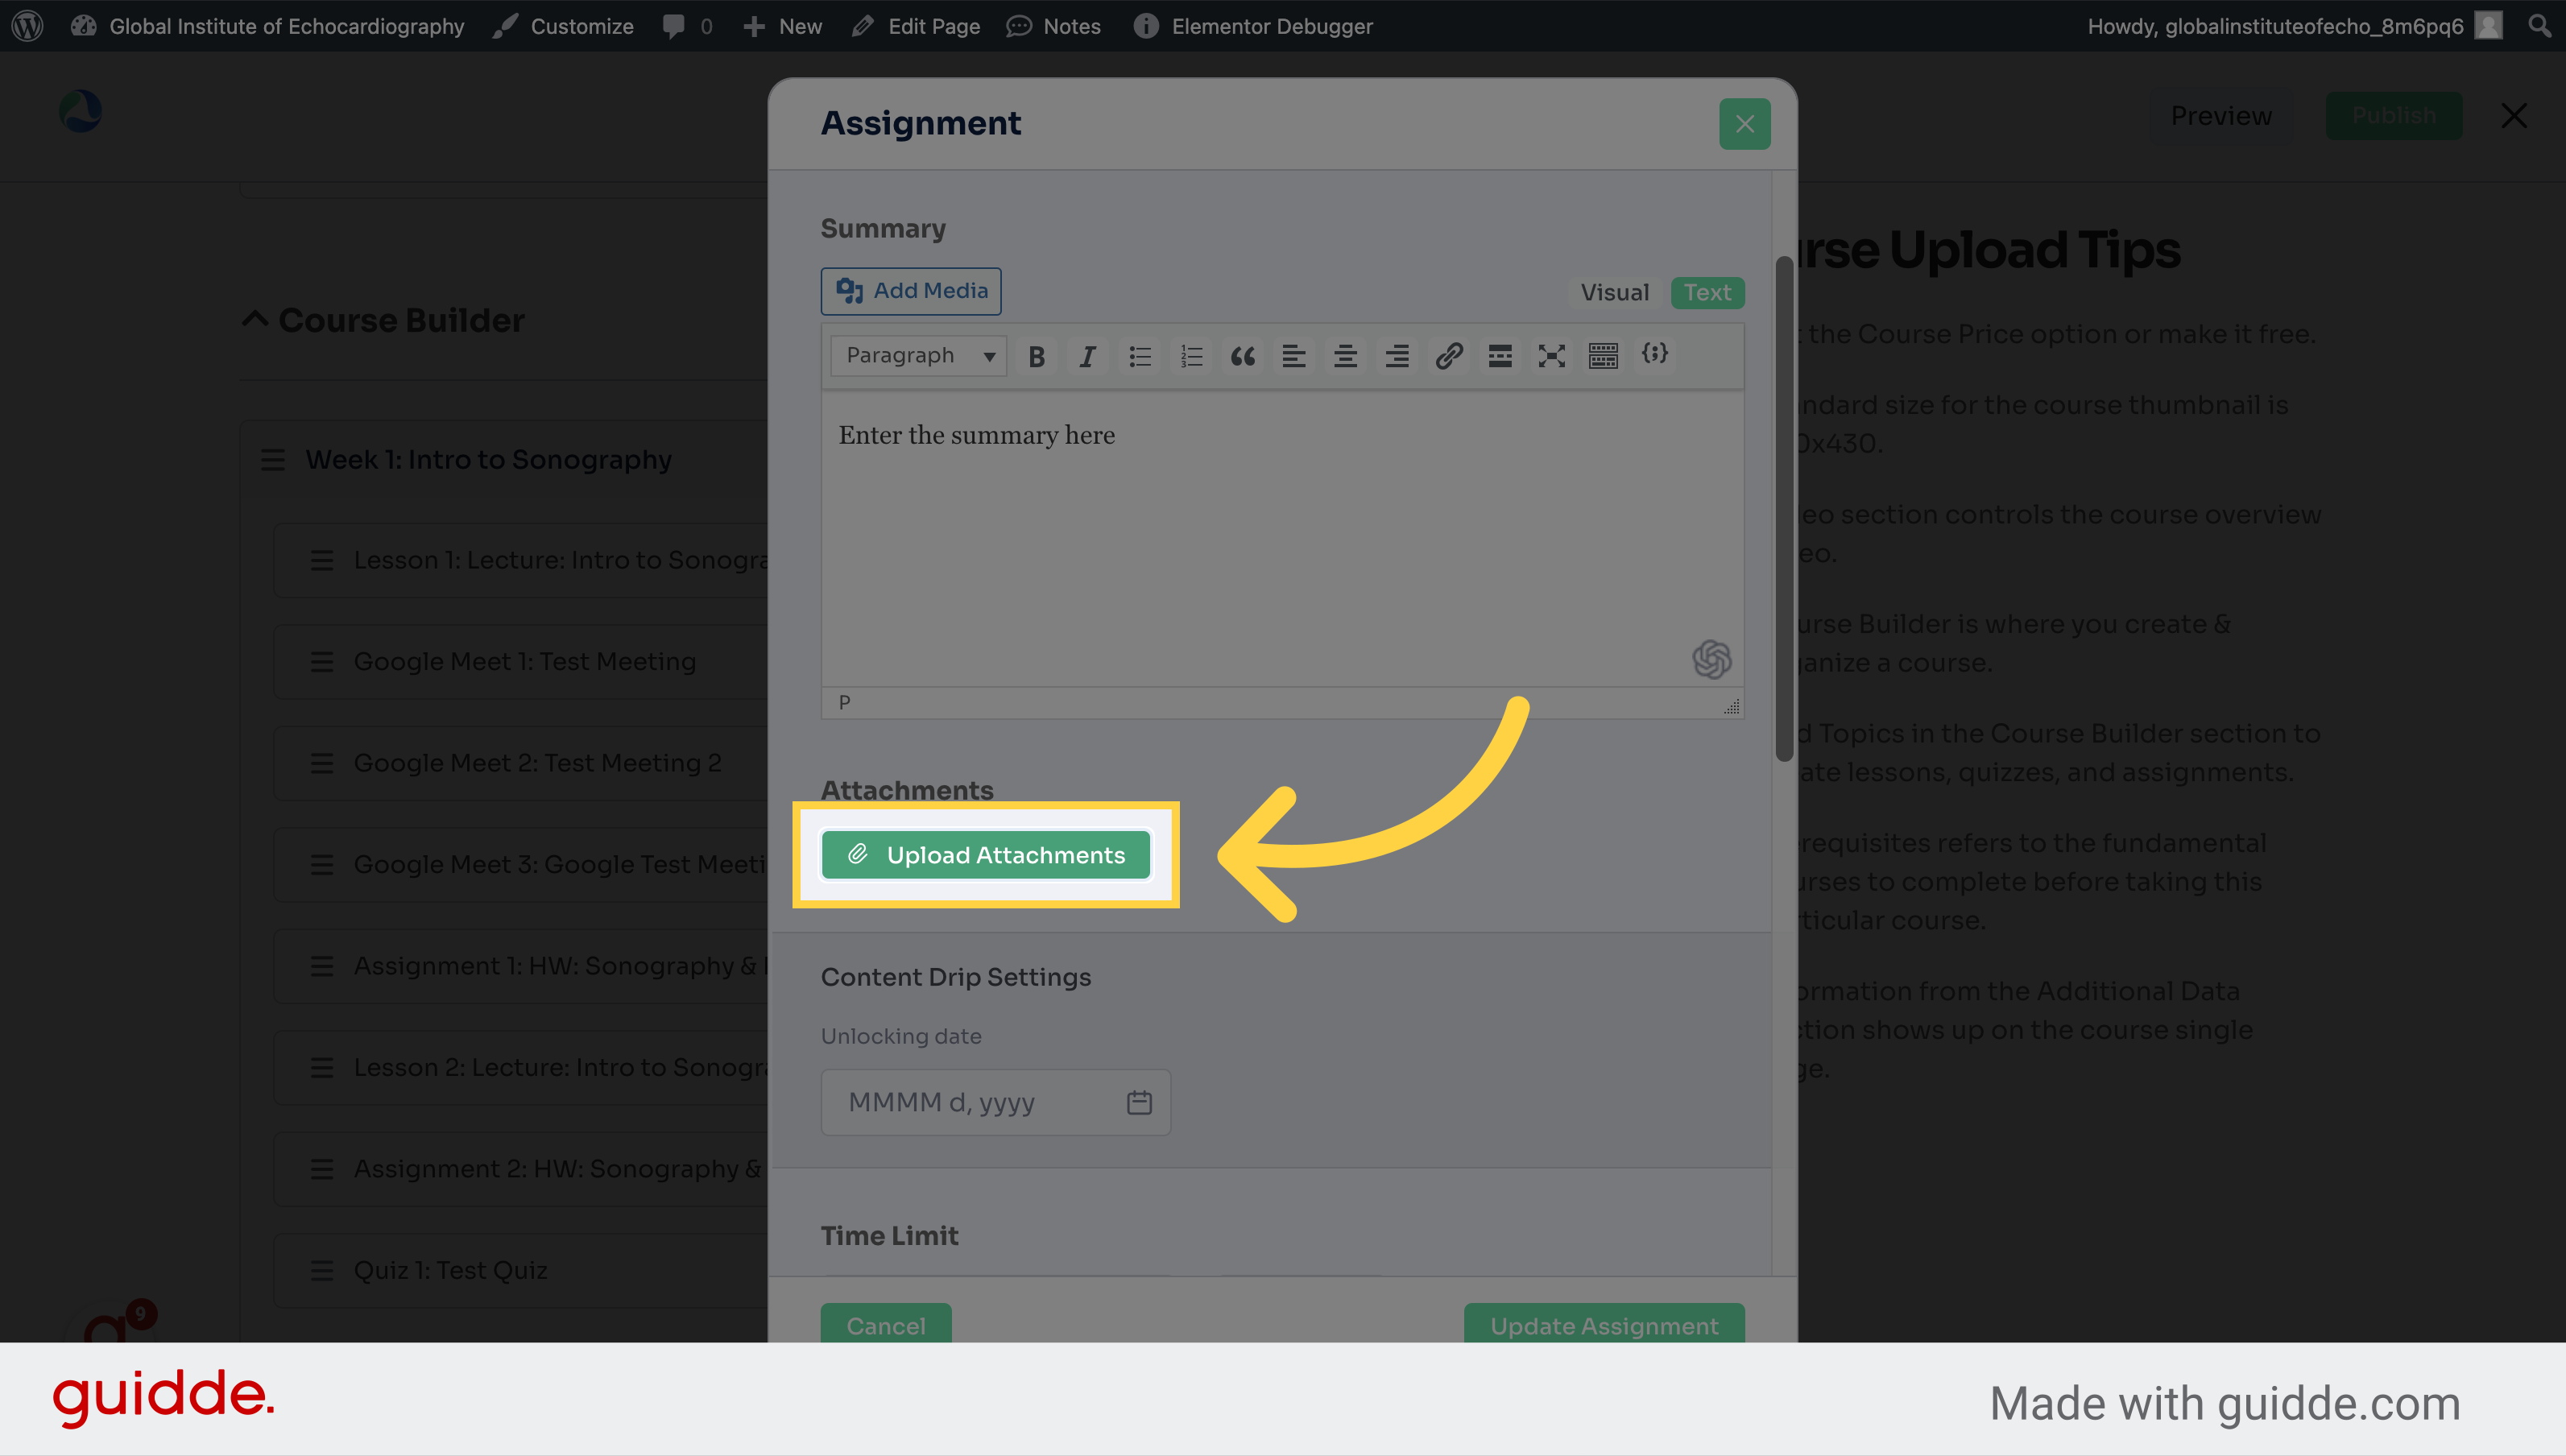 Click 'Upload Attachments' to add appropriate attachments such as pdfs, questions, or assignment resources